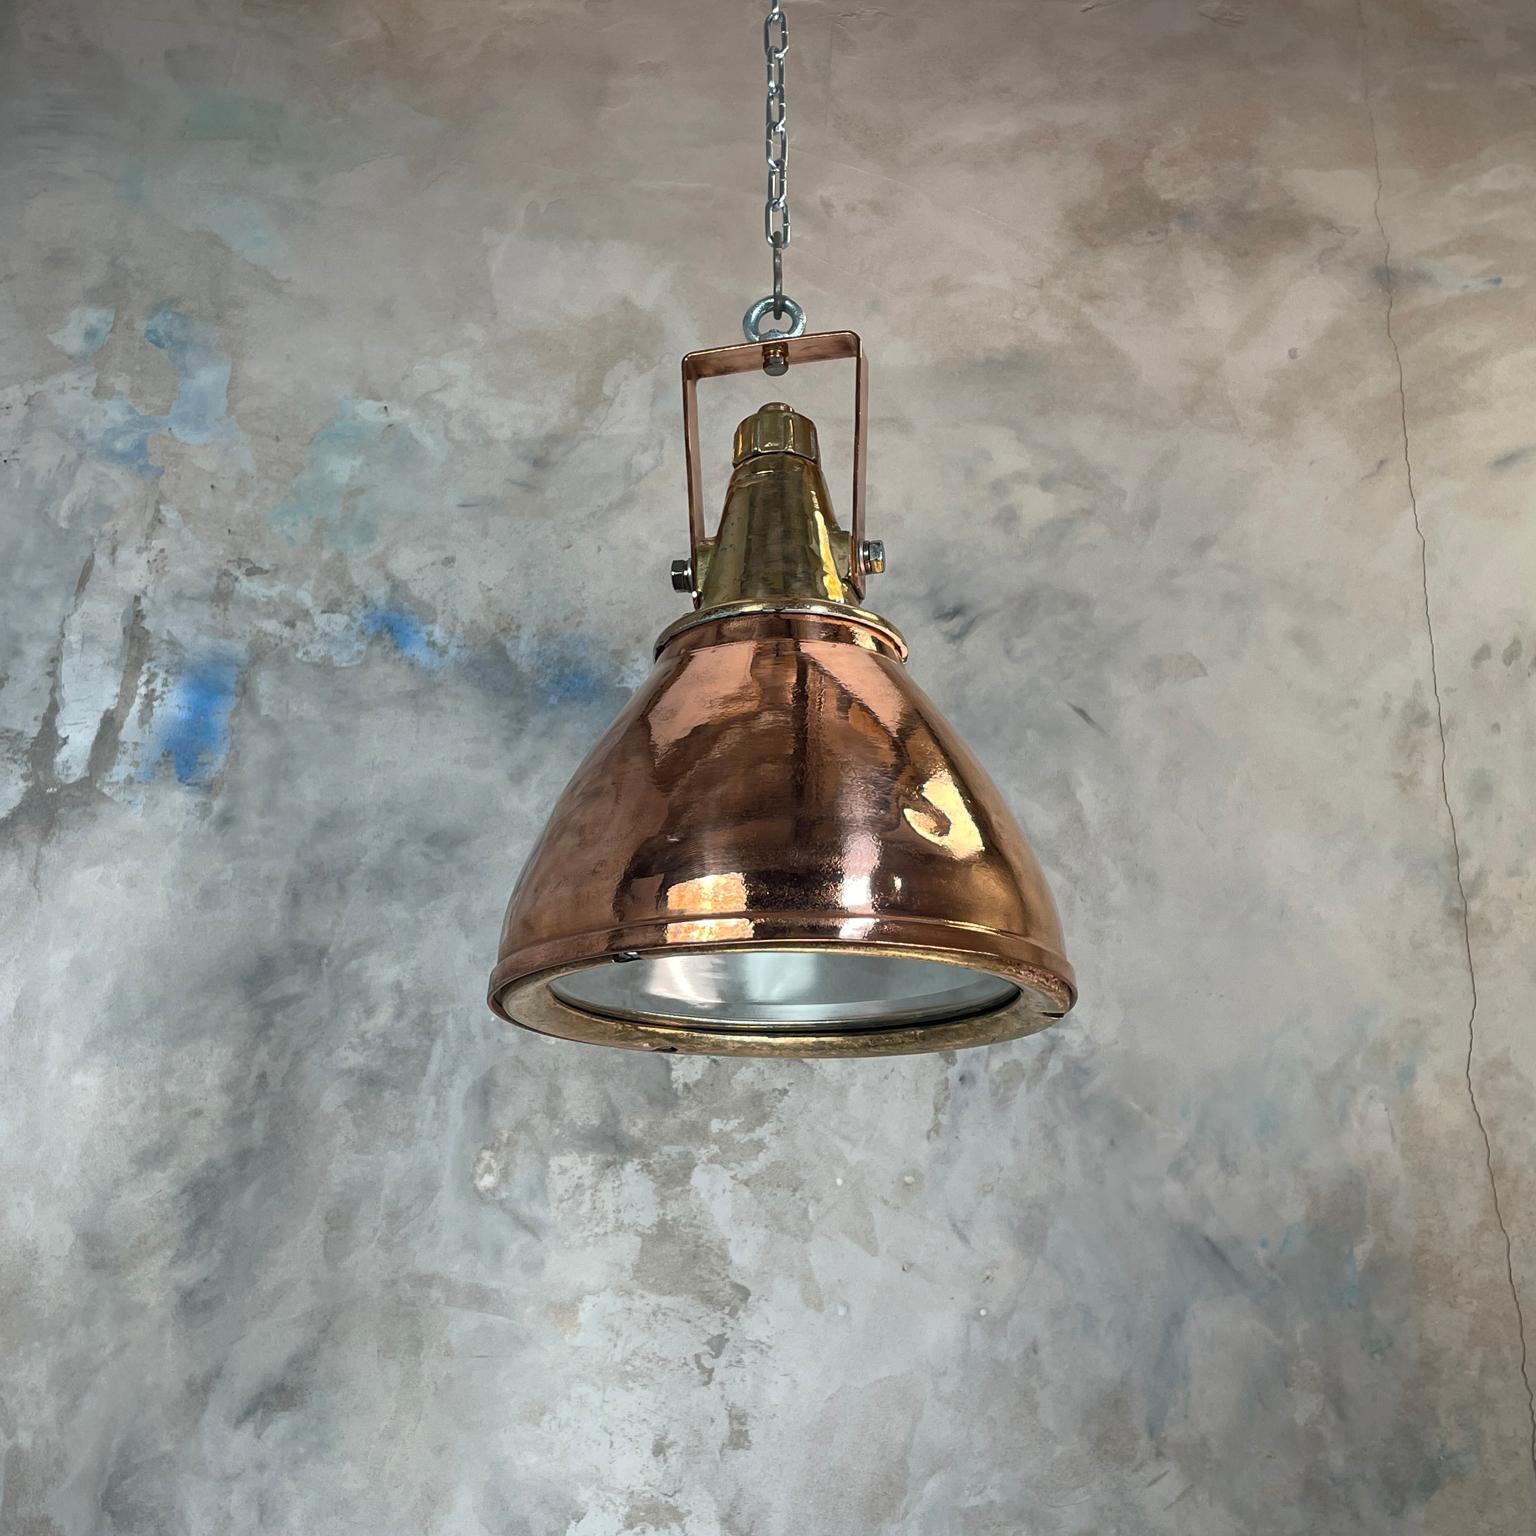 1970s German Copper & Brass Industrial Ceiling Pendant Light with Beam Focus 15